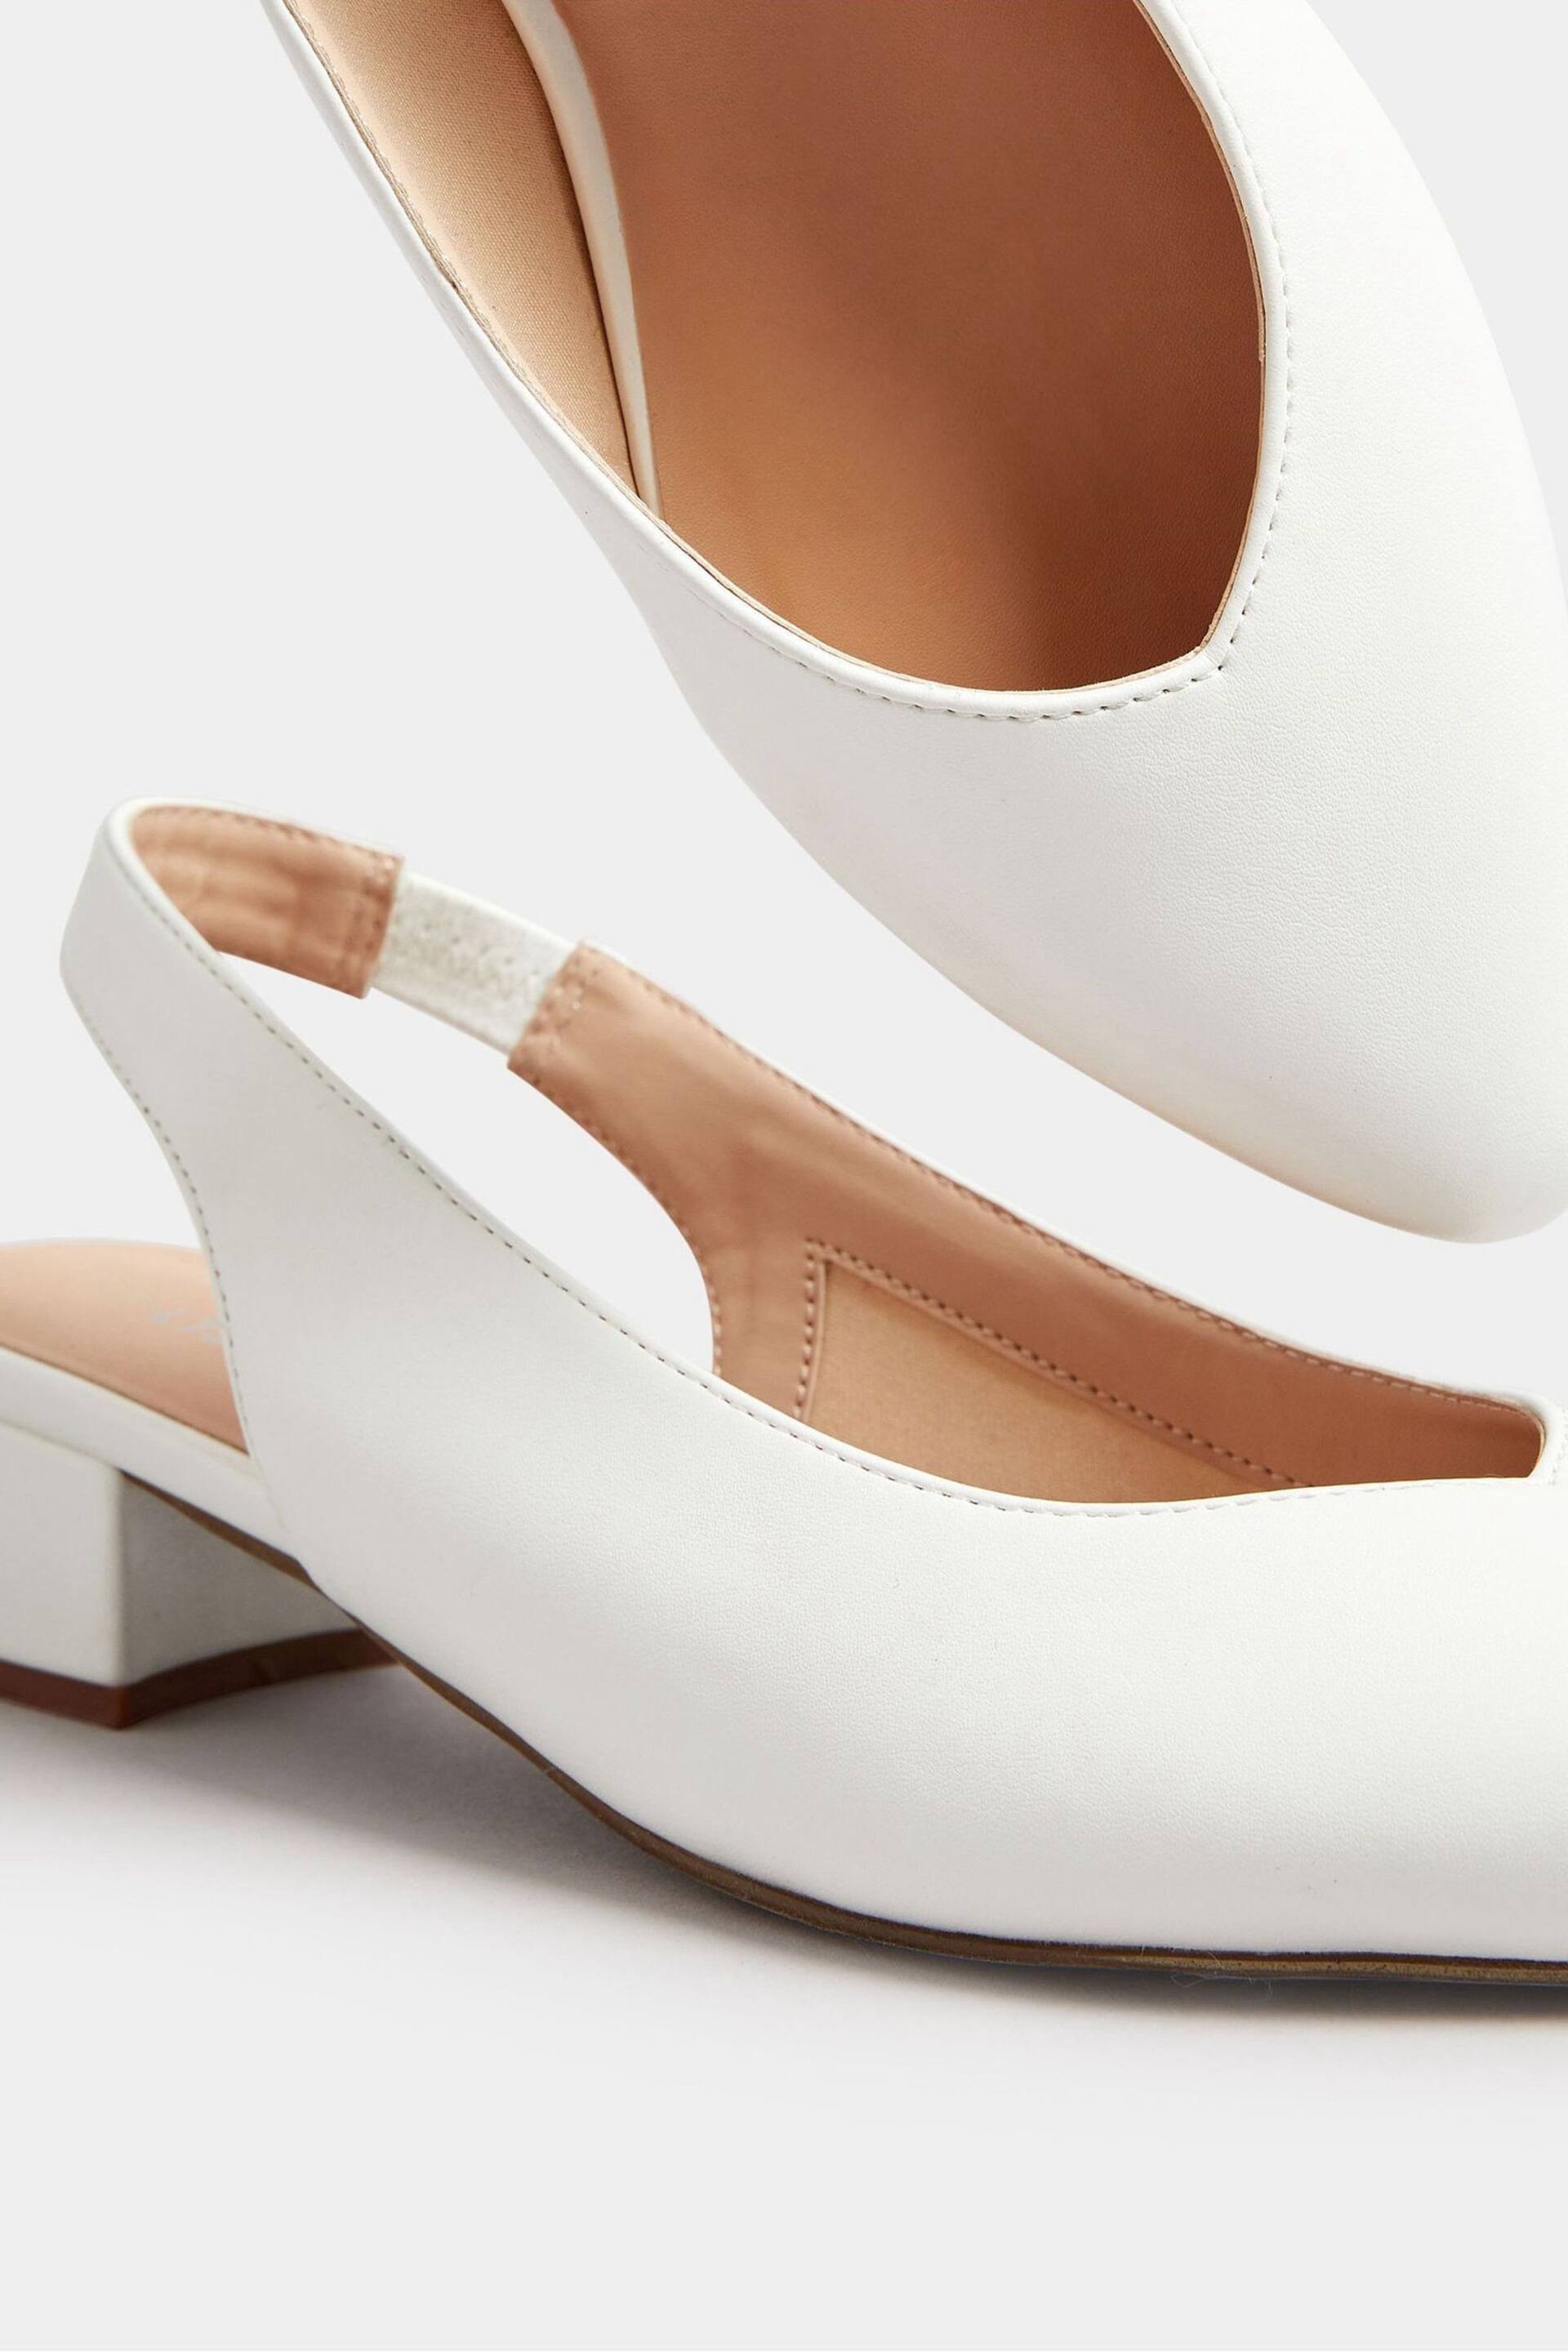 Long Tall Sally White Slingbacks Point Mid Block Shoes - Image 5 of 5